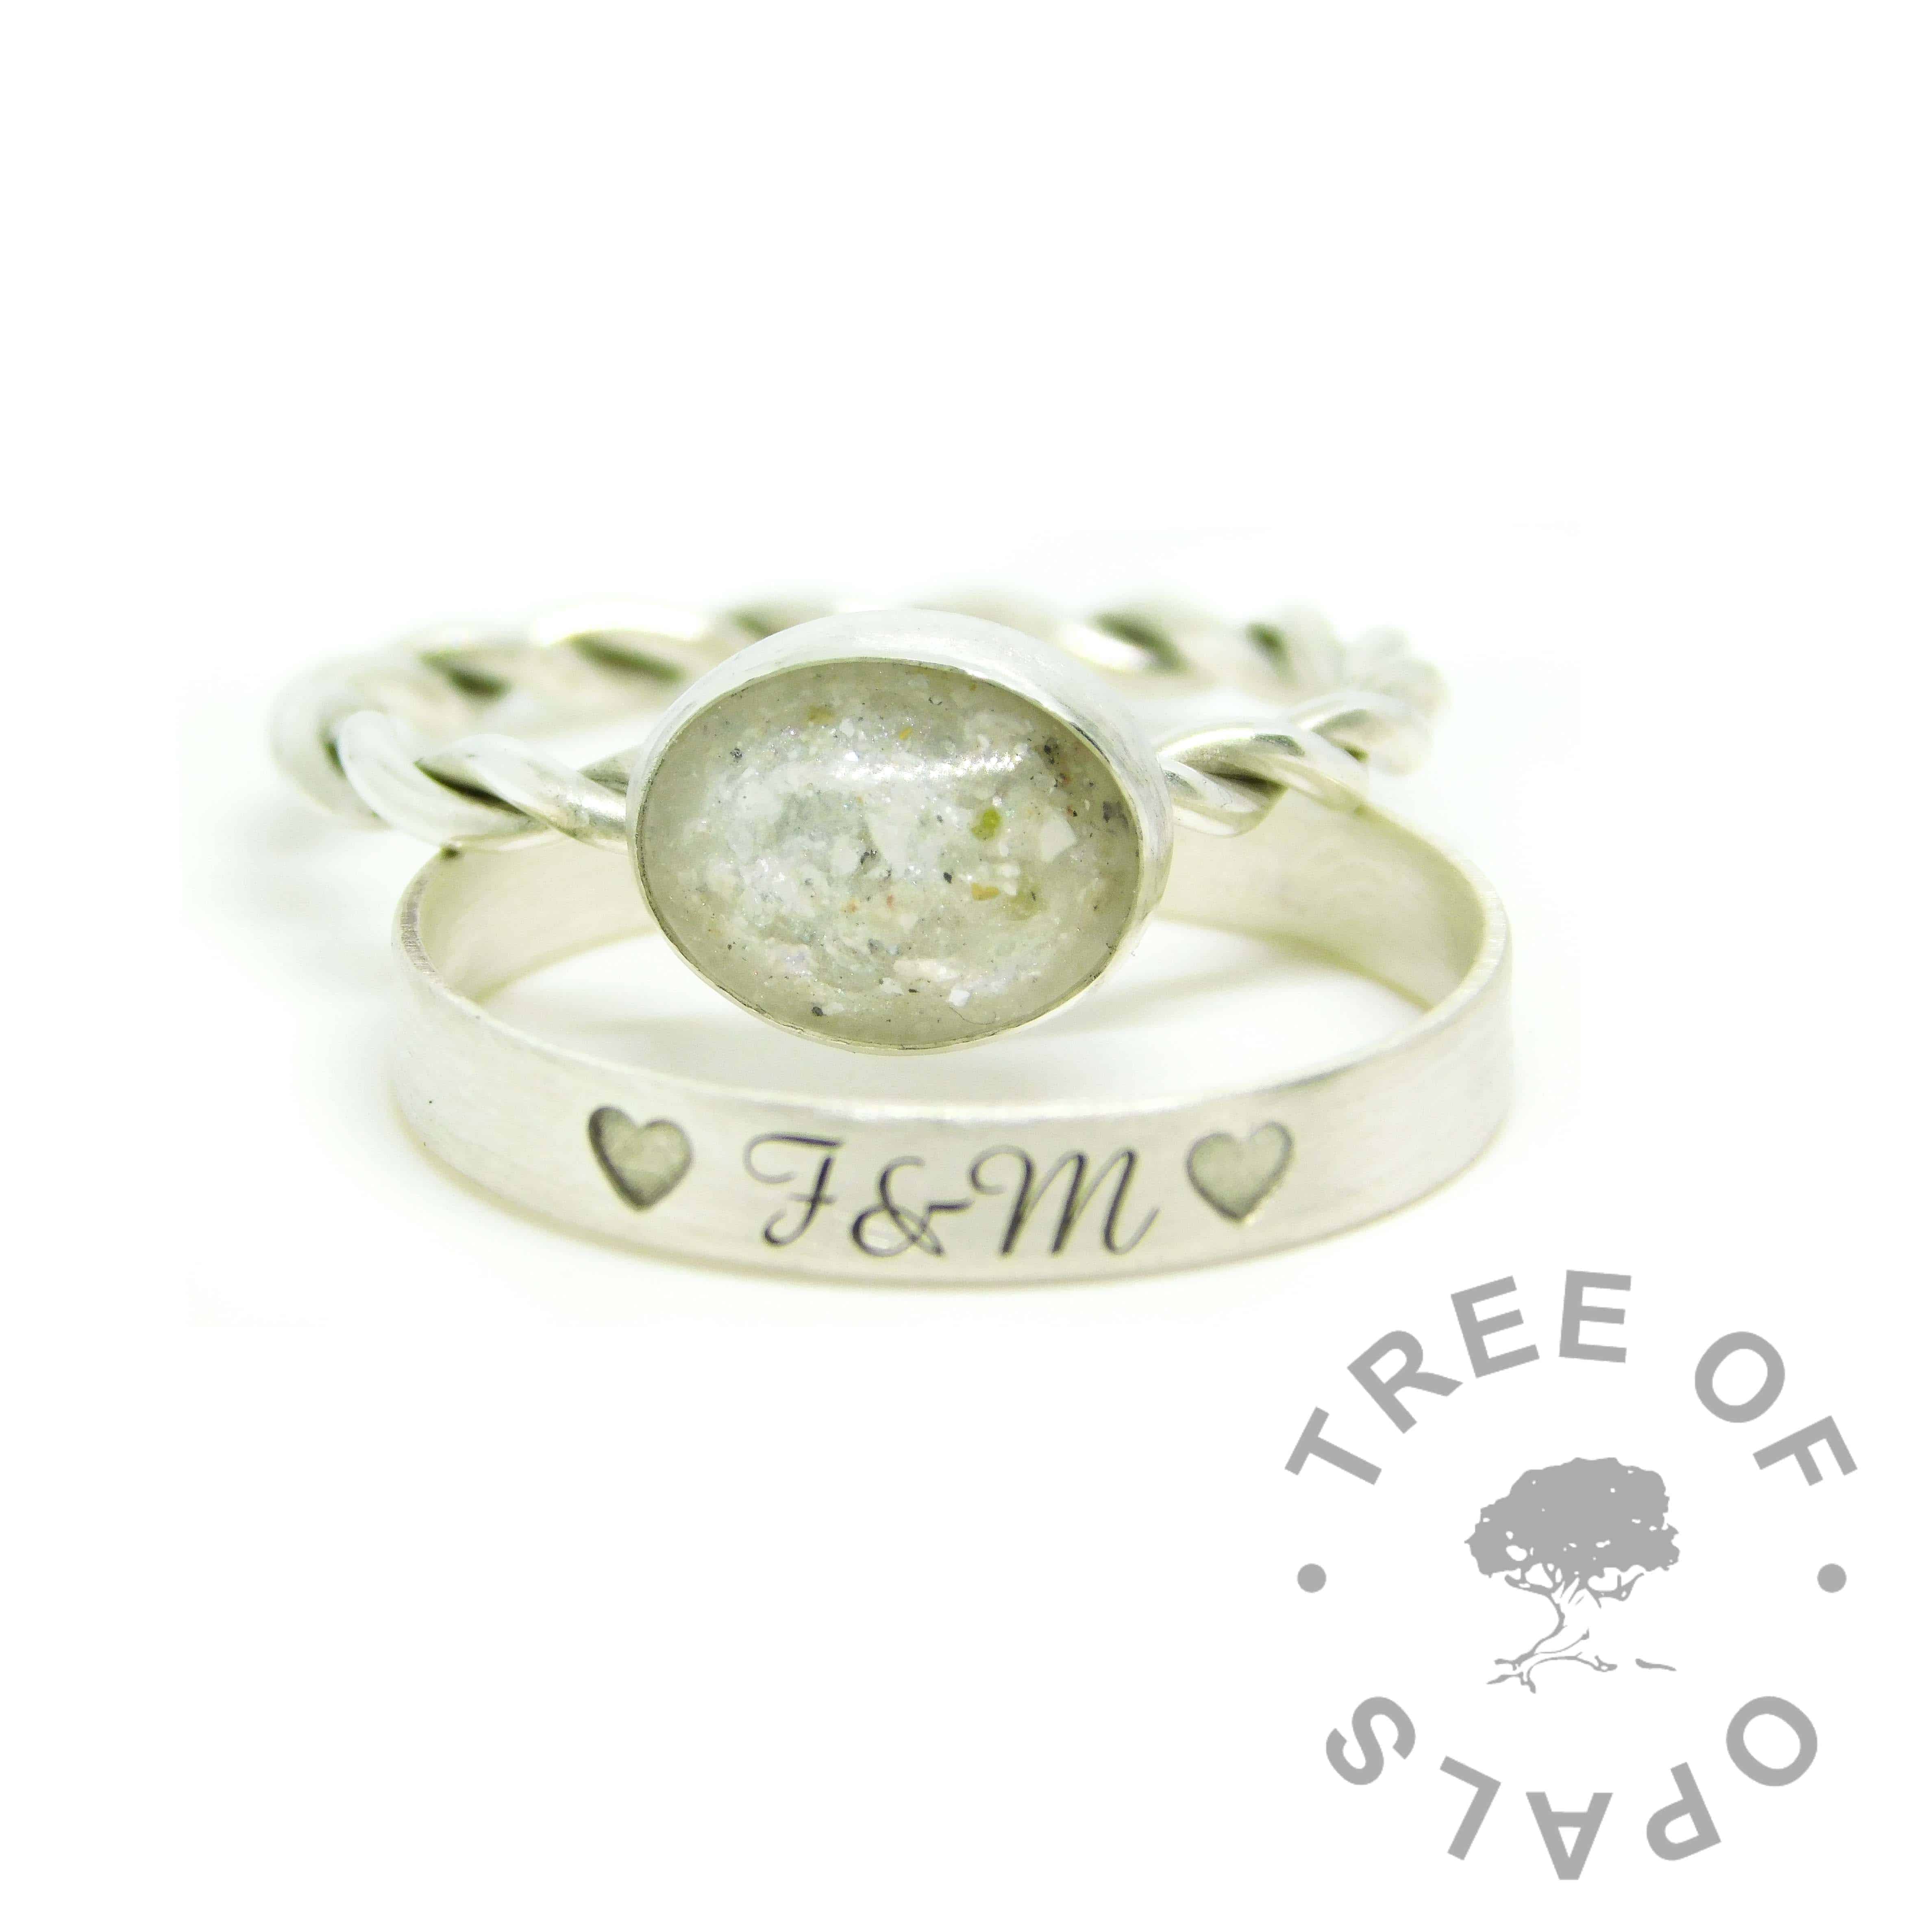 white ashes ring, cremation ashes ring on twisted band. Unicorn white resin sparkle mix, naturally light ashes. Engraved wide band brushed stacking ring, outside in Amazone BT font